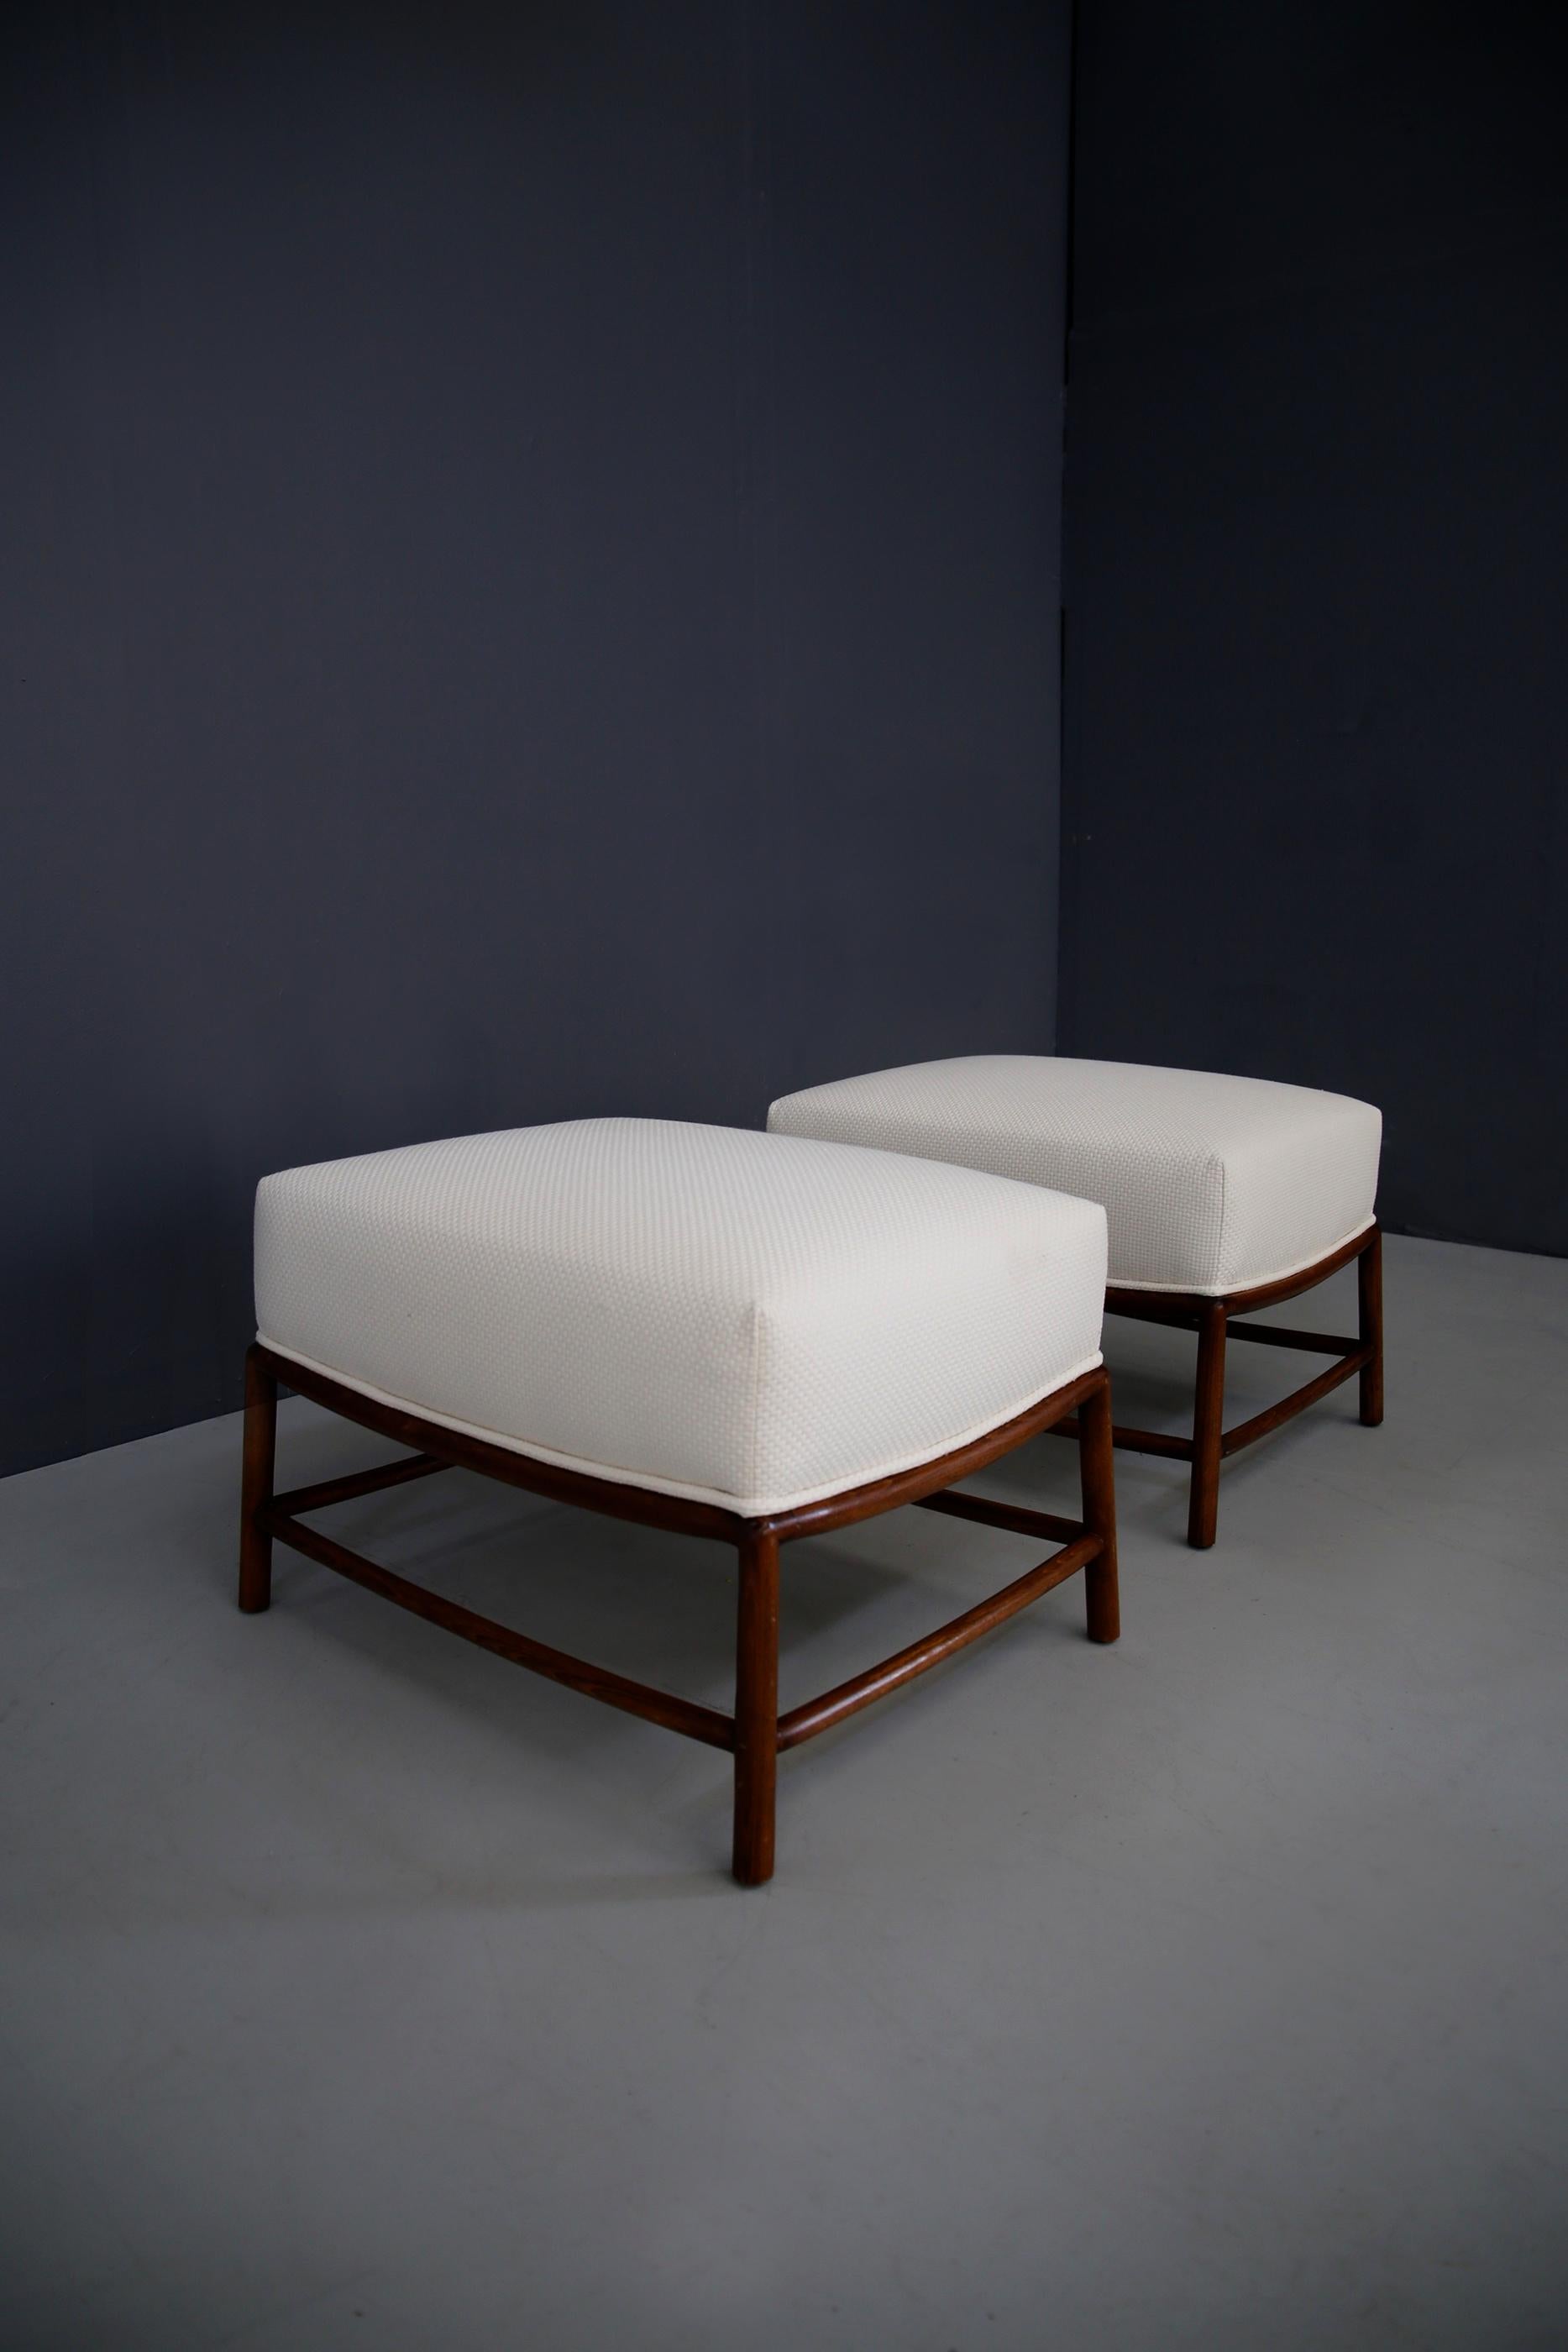 Rare pair of stools, pouf designed by T.H. Robsjohn-Gibbings of 1950 restored in a white cotton fabric. Their structure is in walnut wood. The pair is in perfect condition and is a beautiful piece of furniture. The poufs are ideal to complete the